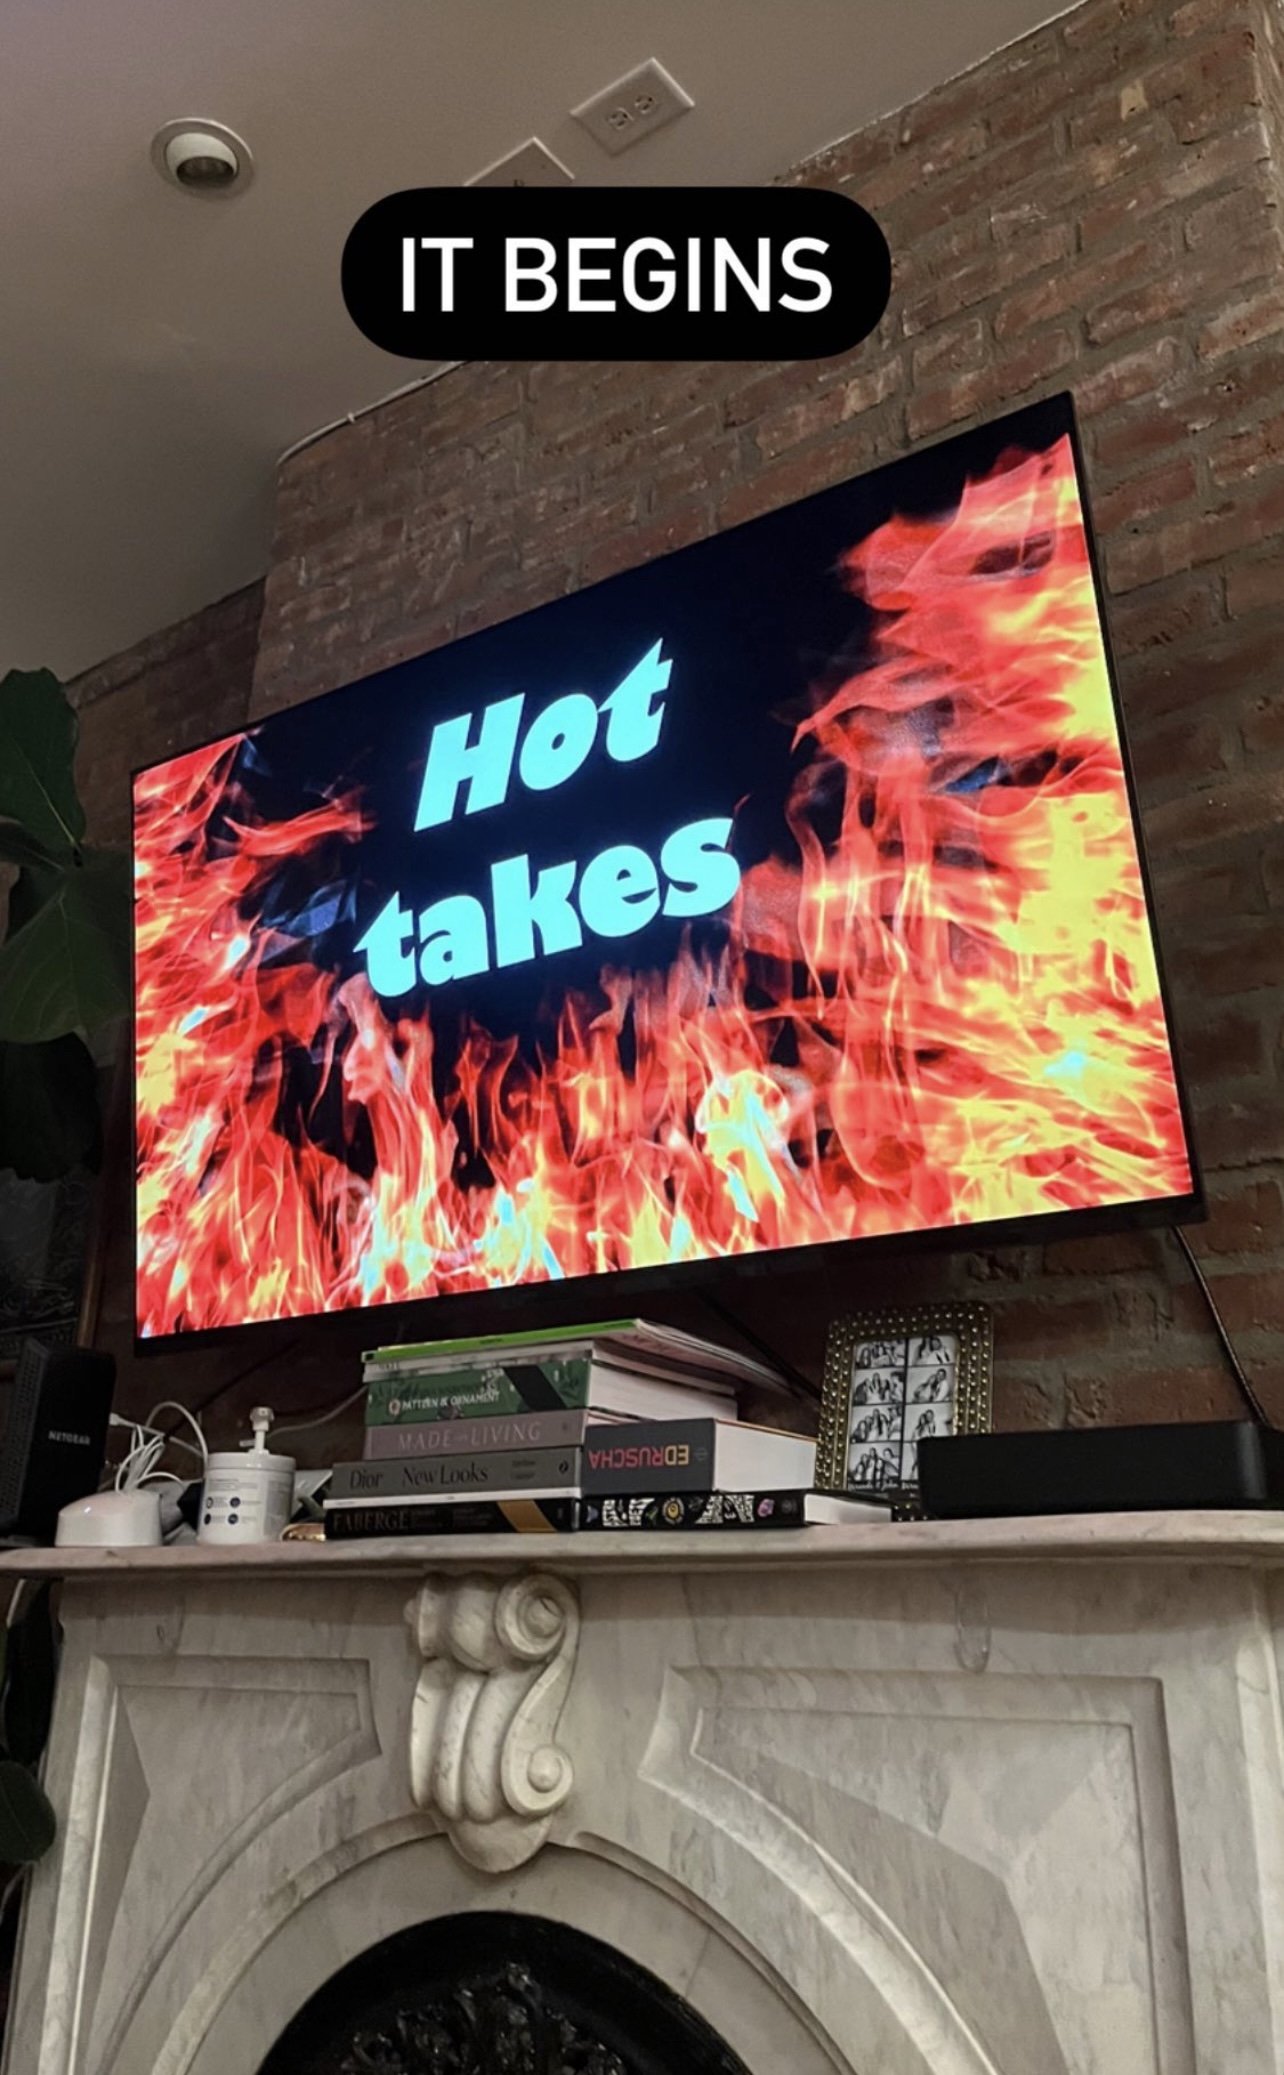 Hot takes in white text on a big screen surrounded by flames in PowerPoint